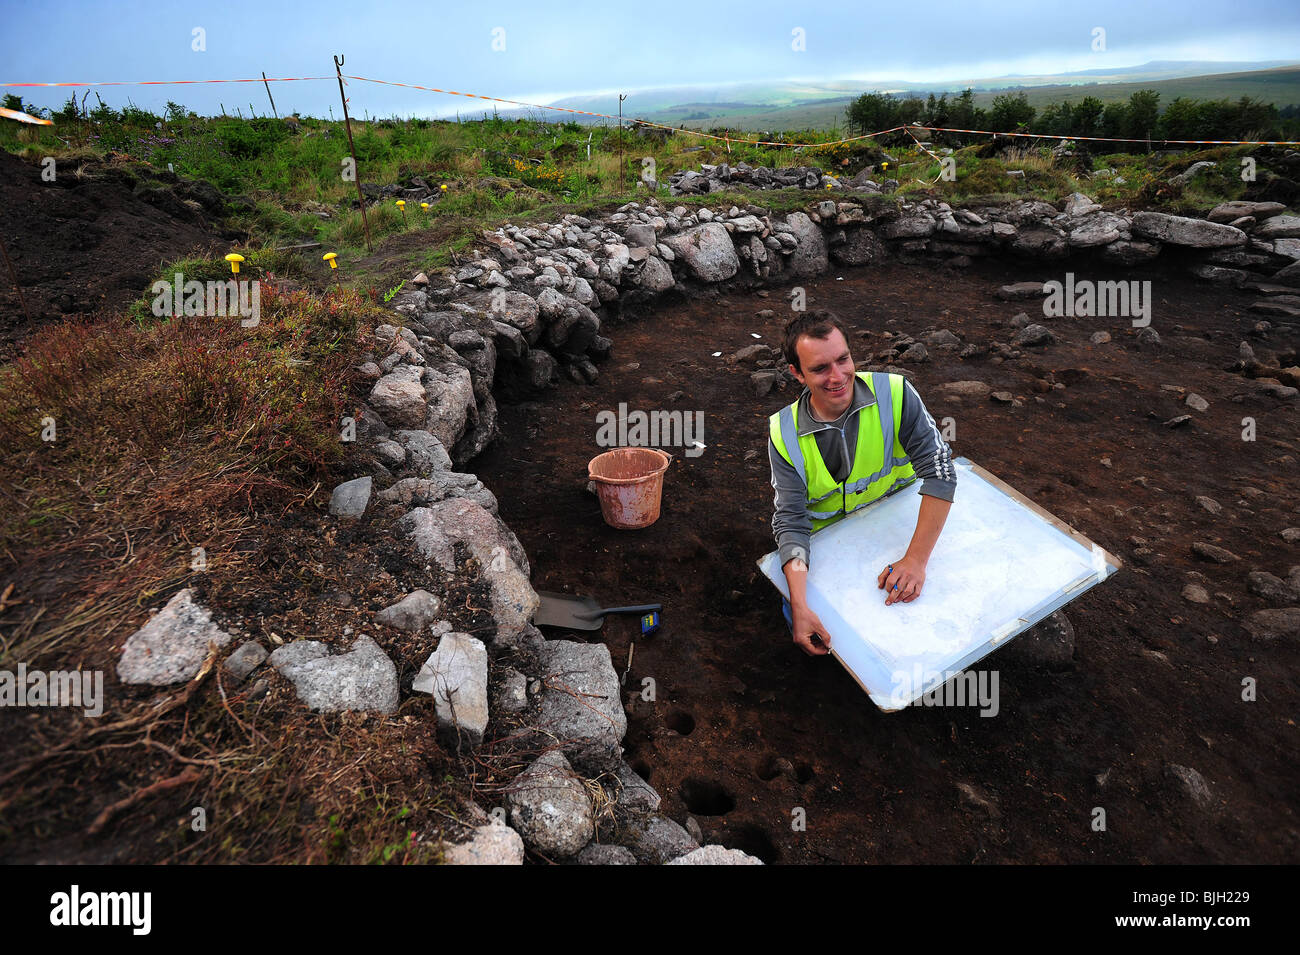 The Archaeological roundhouse site at Bellever, Dartmoor, which is being surveyed by Dartmoor National Park Stock Photo